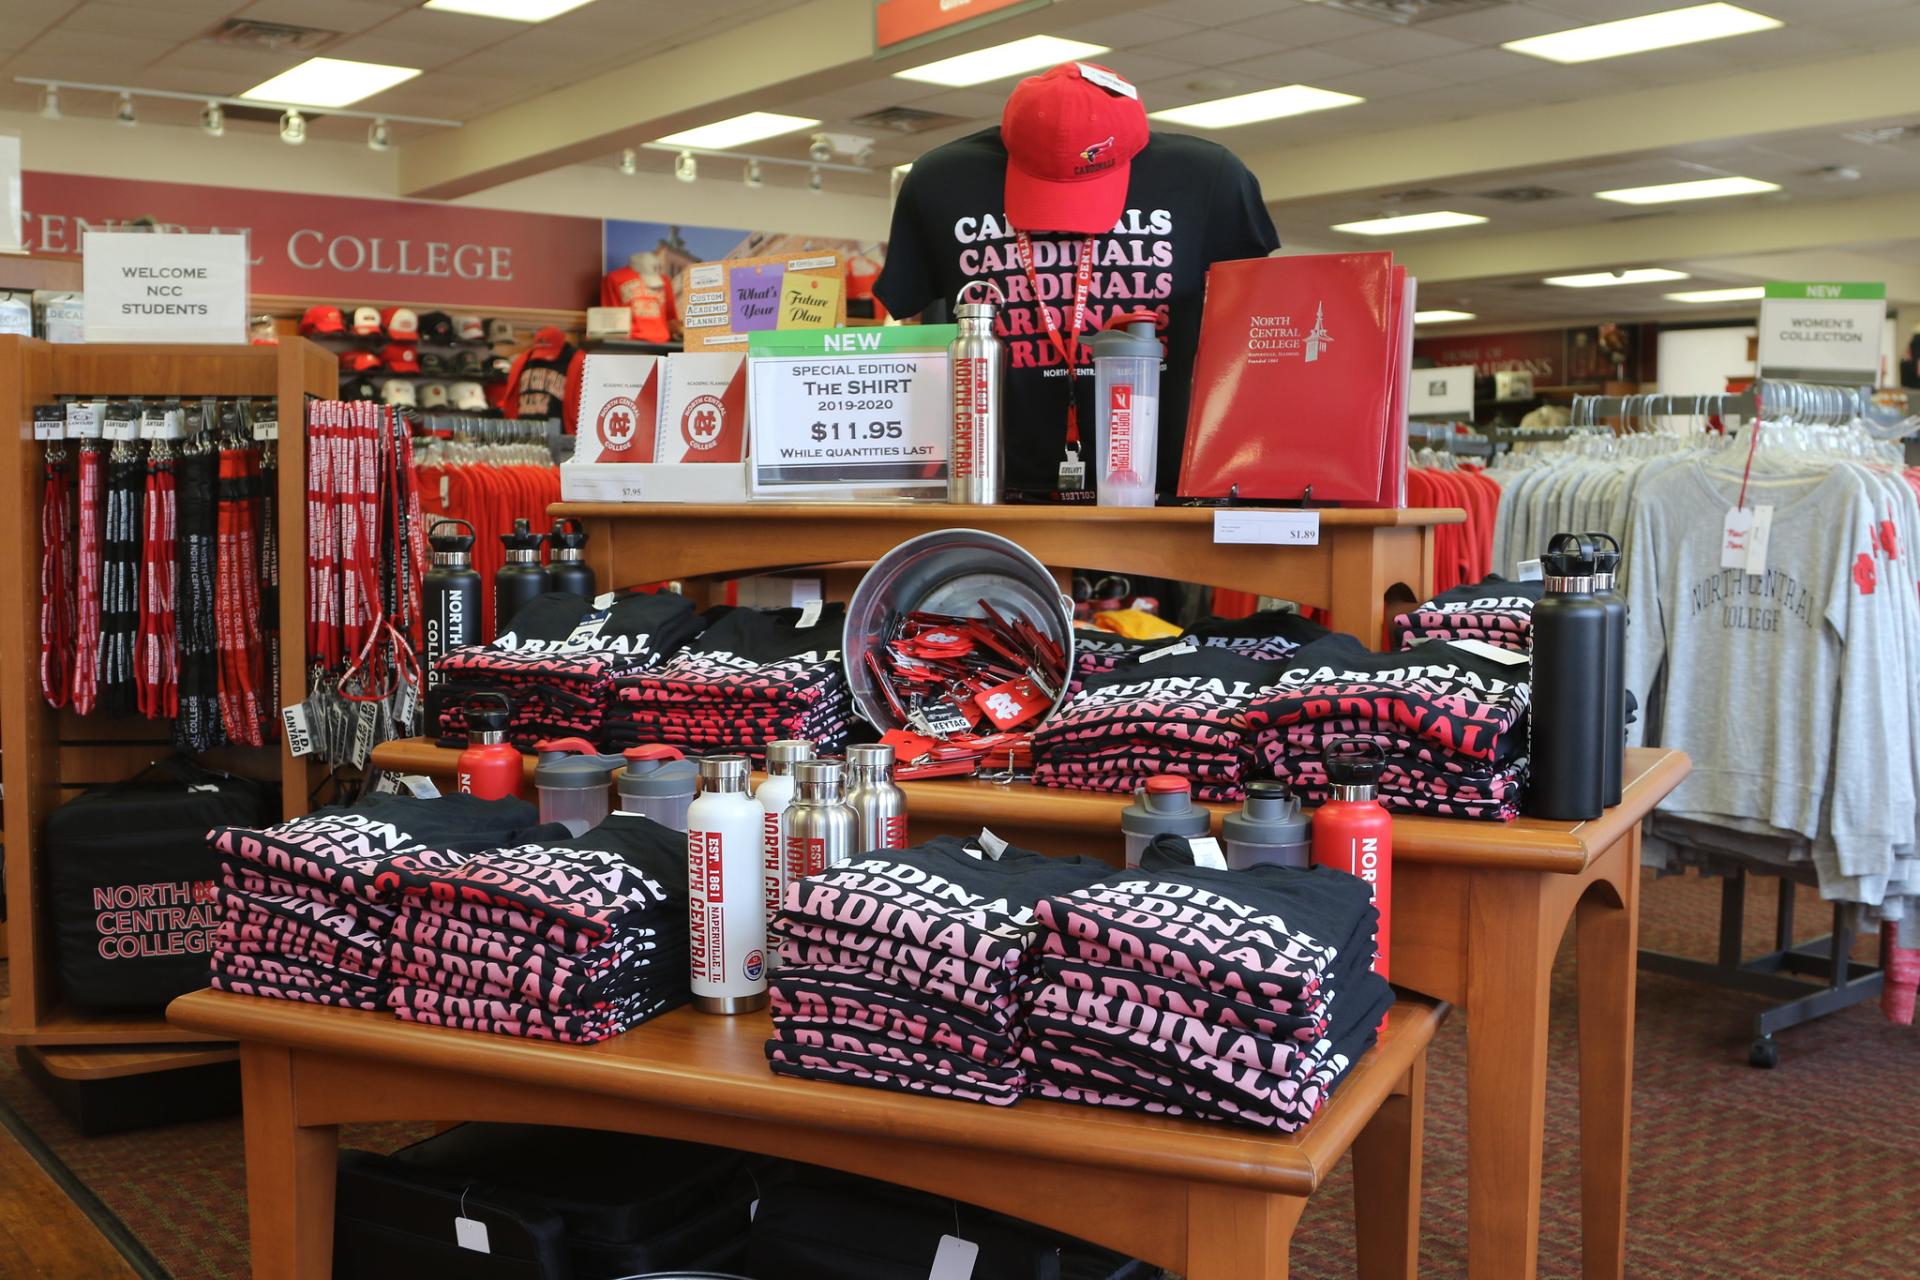 A display of the official North Central College student shirt.